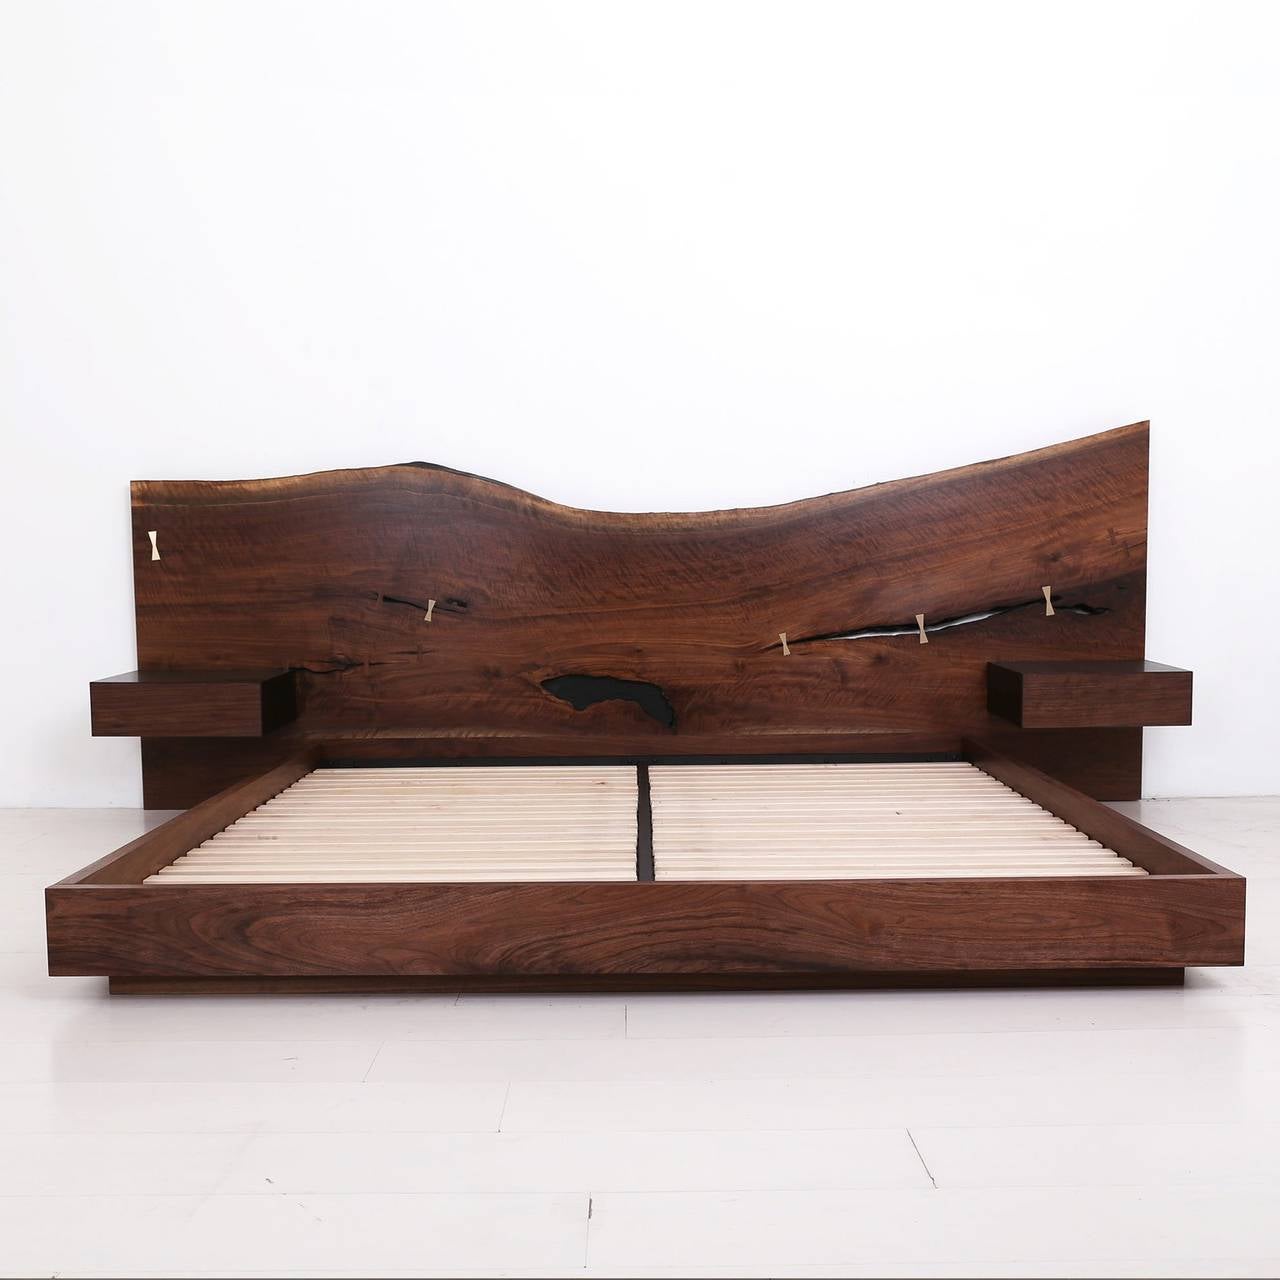 The St. Pierre bed headboard is crafted from a one-of-a-kind hardwood slab. Headboard width and height varies based on available slab dimensions. The bed frame is available in metal or wood. 

Pictured in a king-size.

Our large wood slabs are